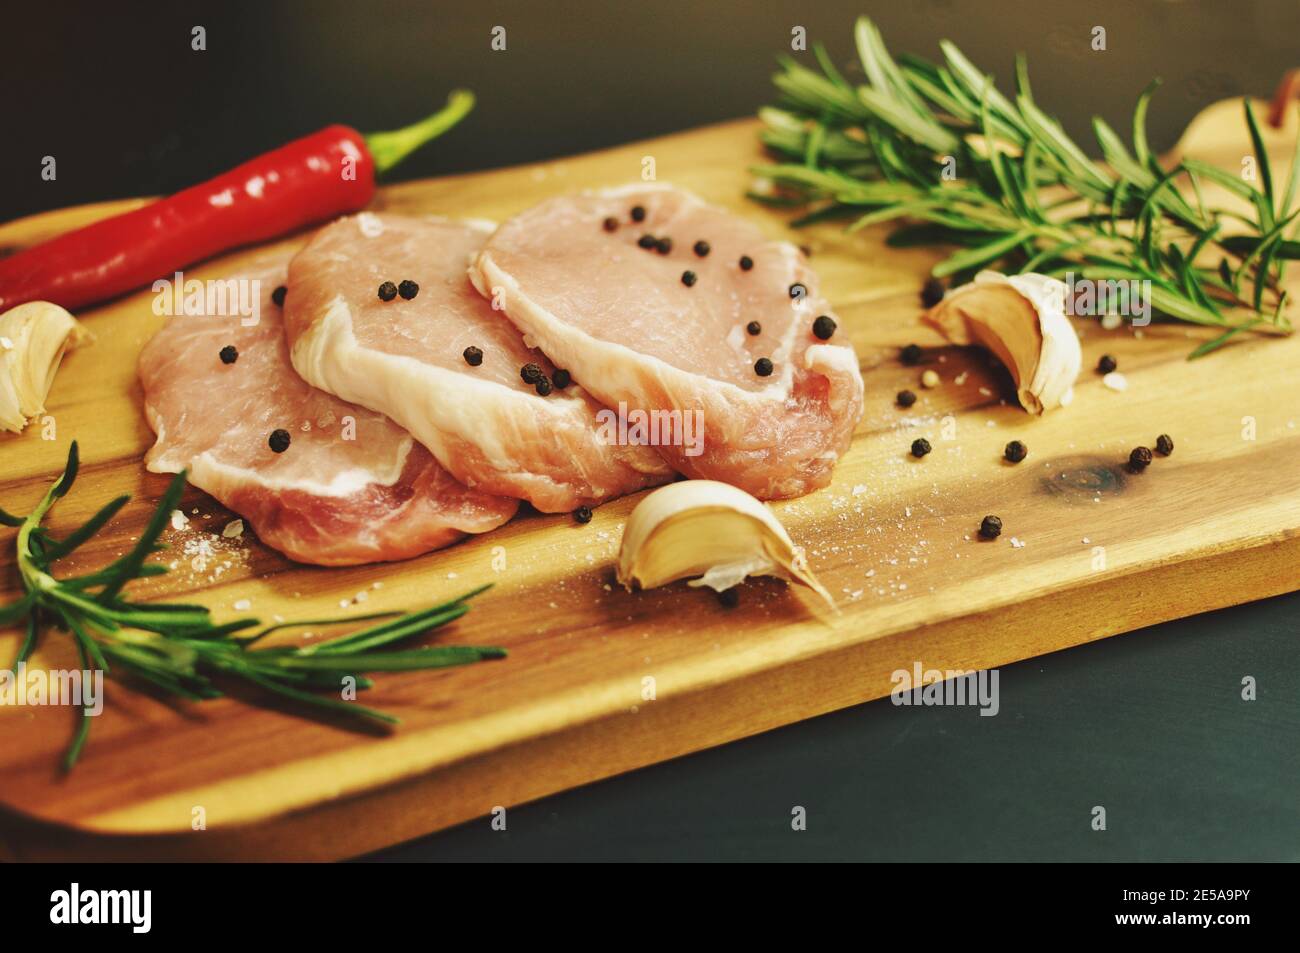 Raw fresh uncooked sliced pork meat fillet dish with rosemary, pepper, salt, red chili pepper, garlic on wooden board and black background. Stock Photo